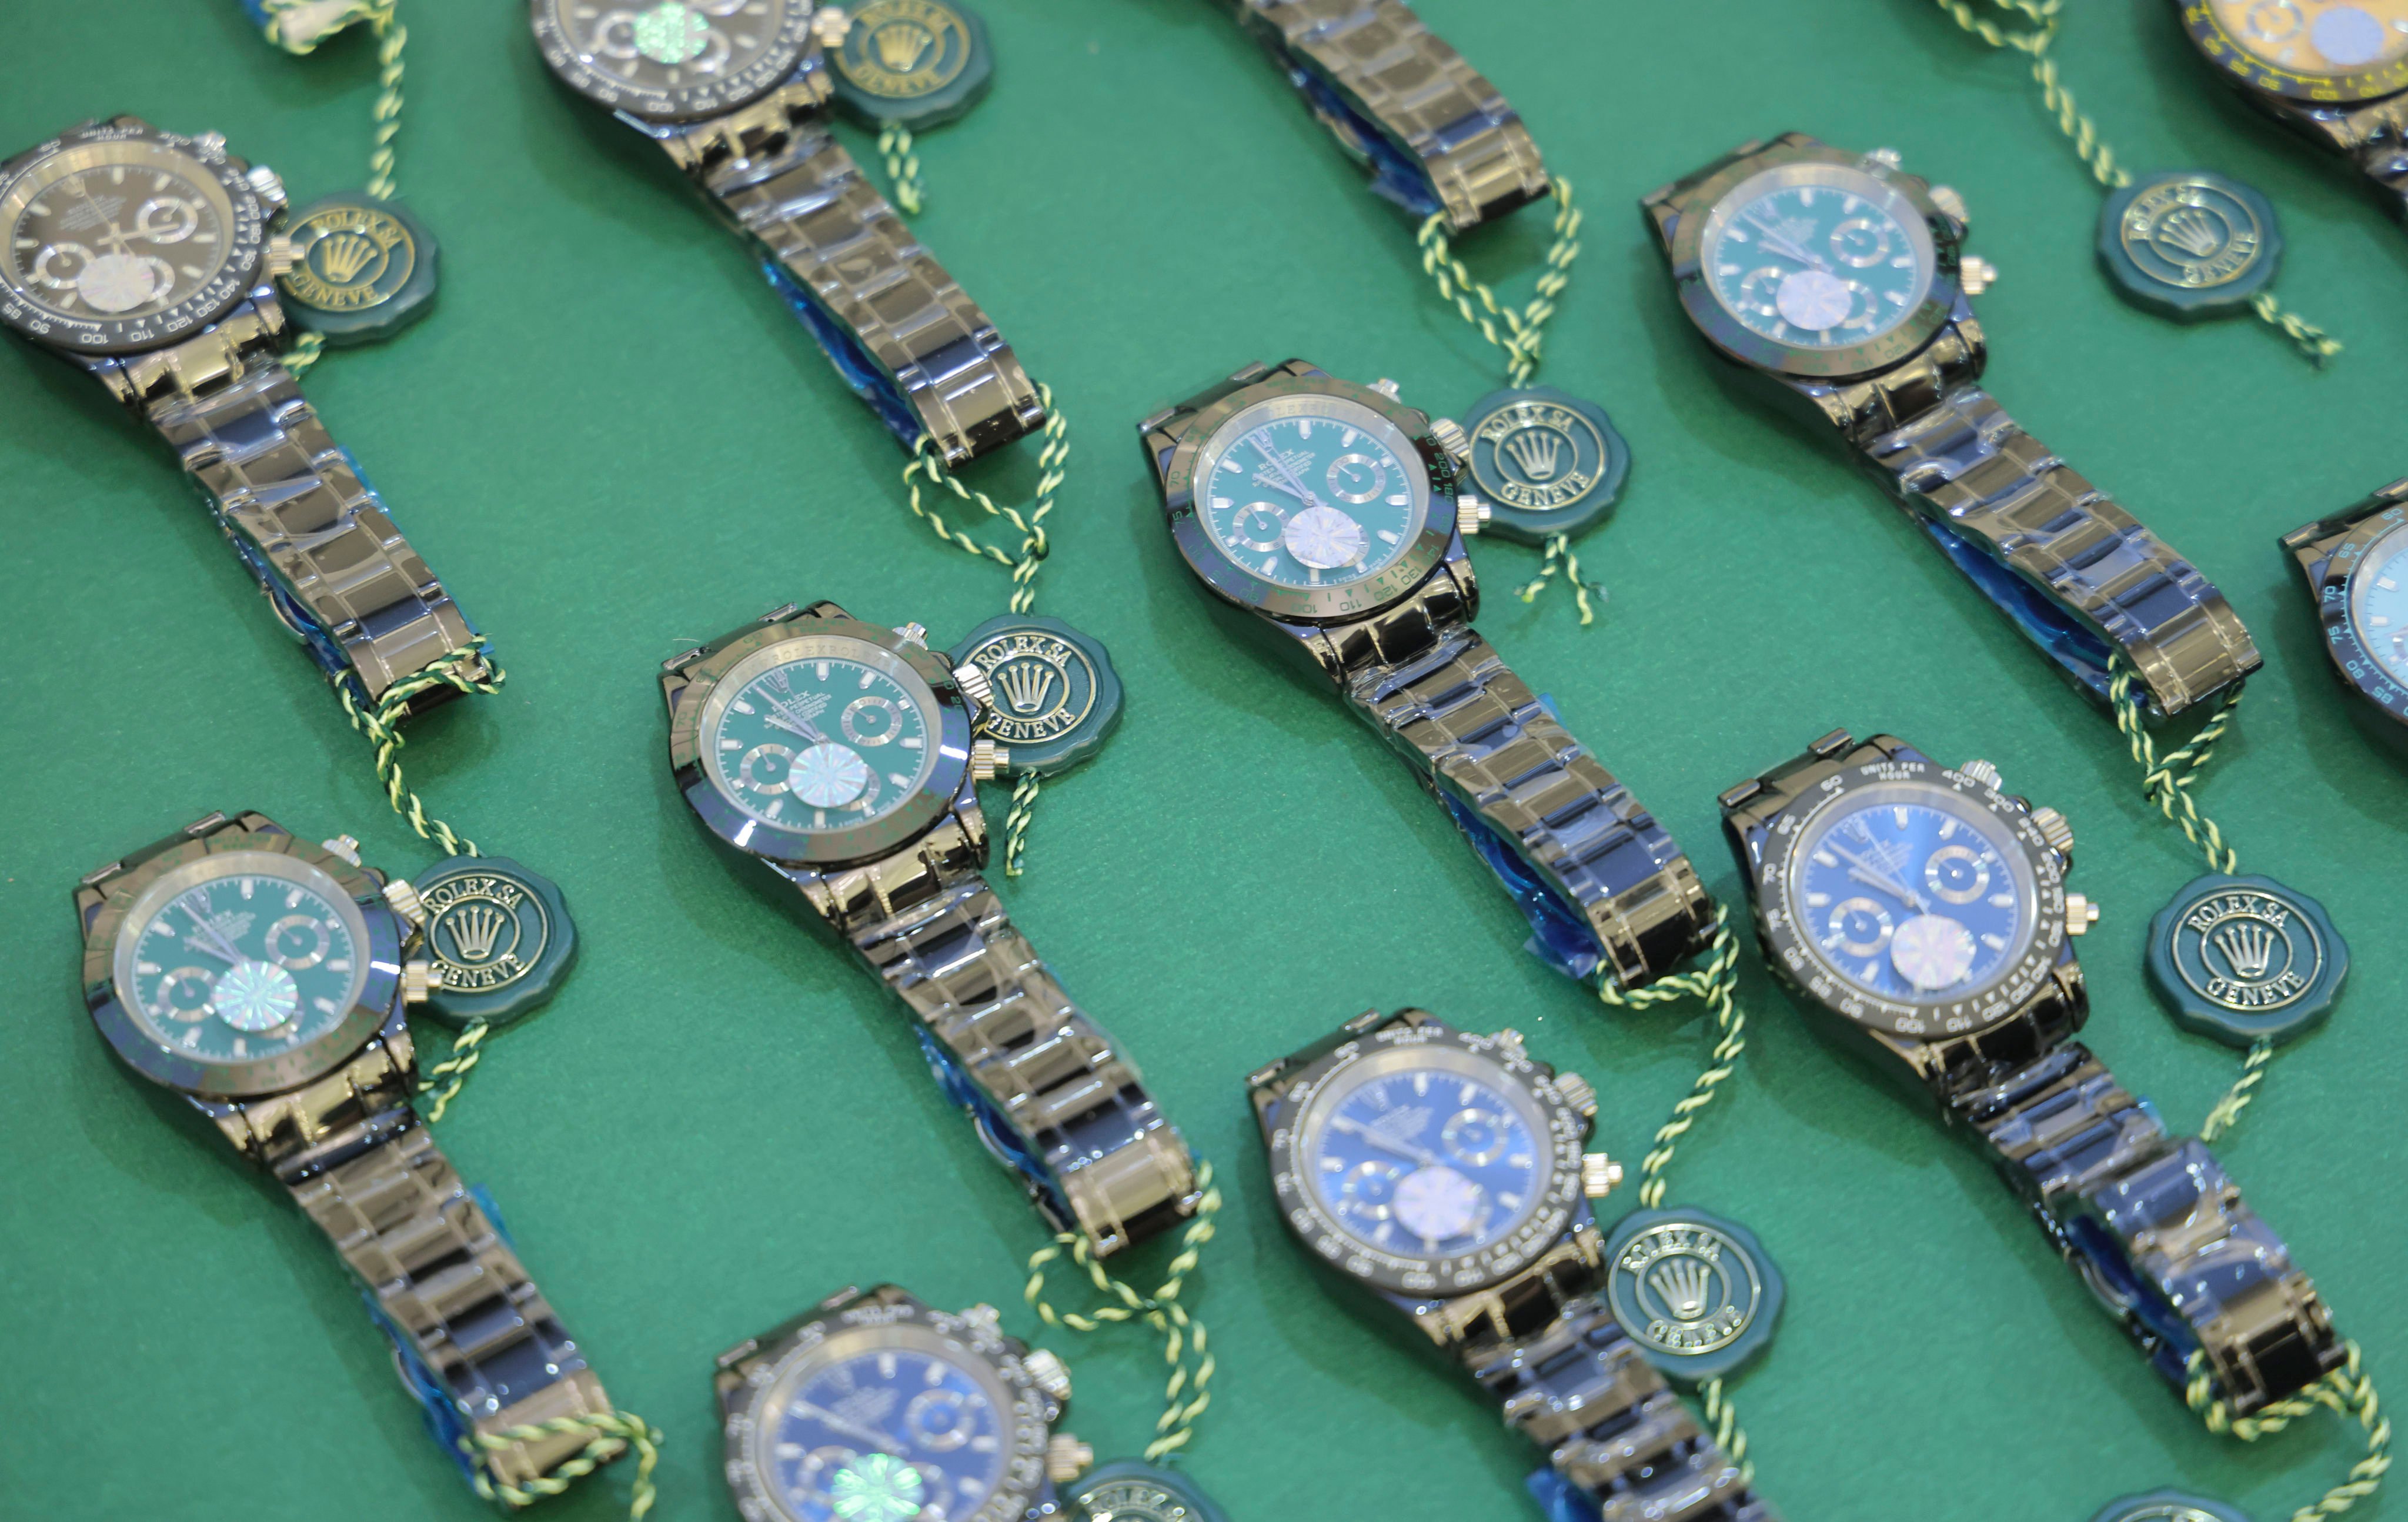 Watches were among the 78,000 counterfeit products discovered in the two-week operation. Photo: Jelly Tse